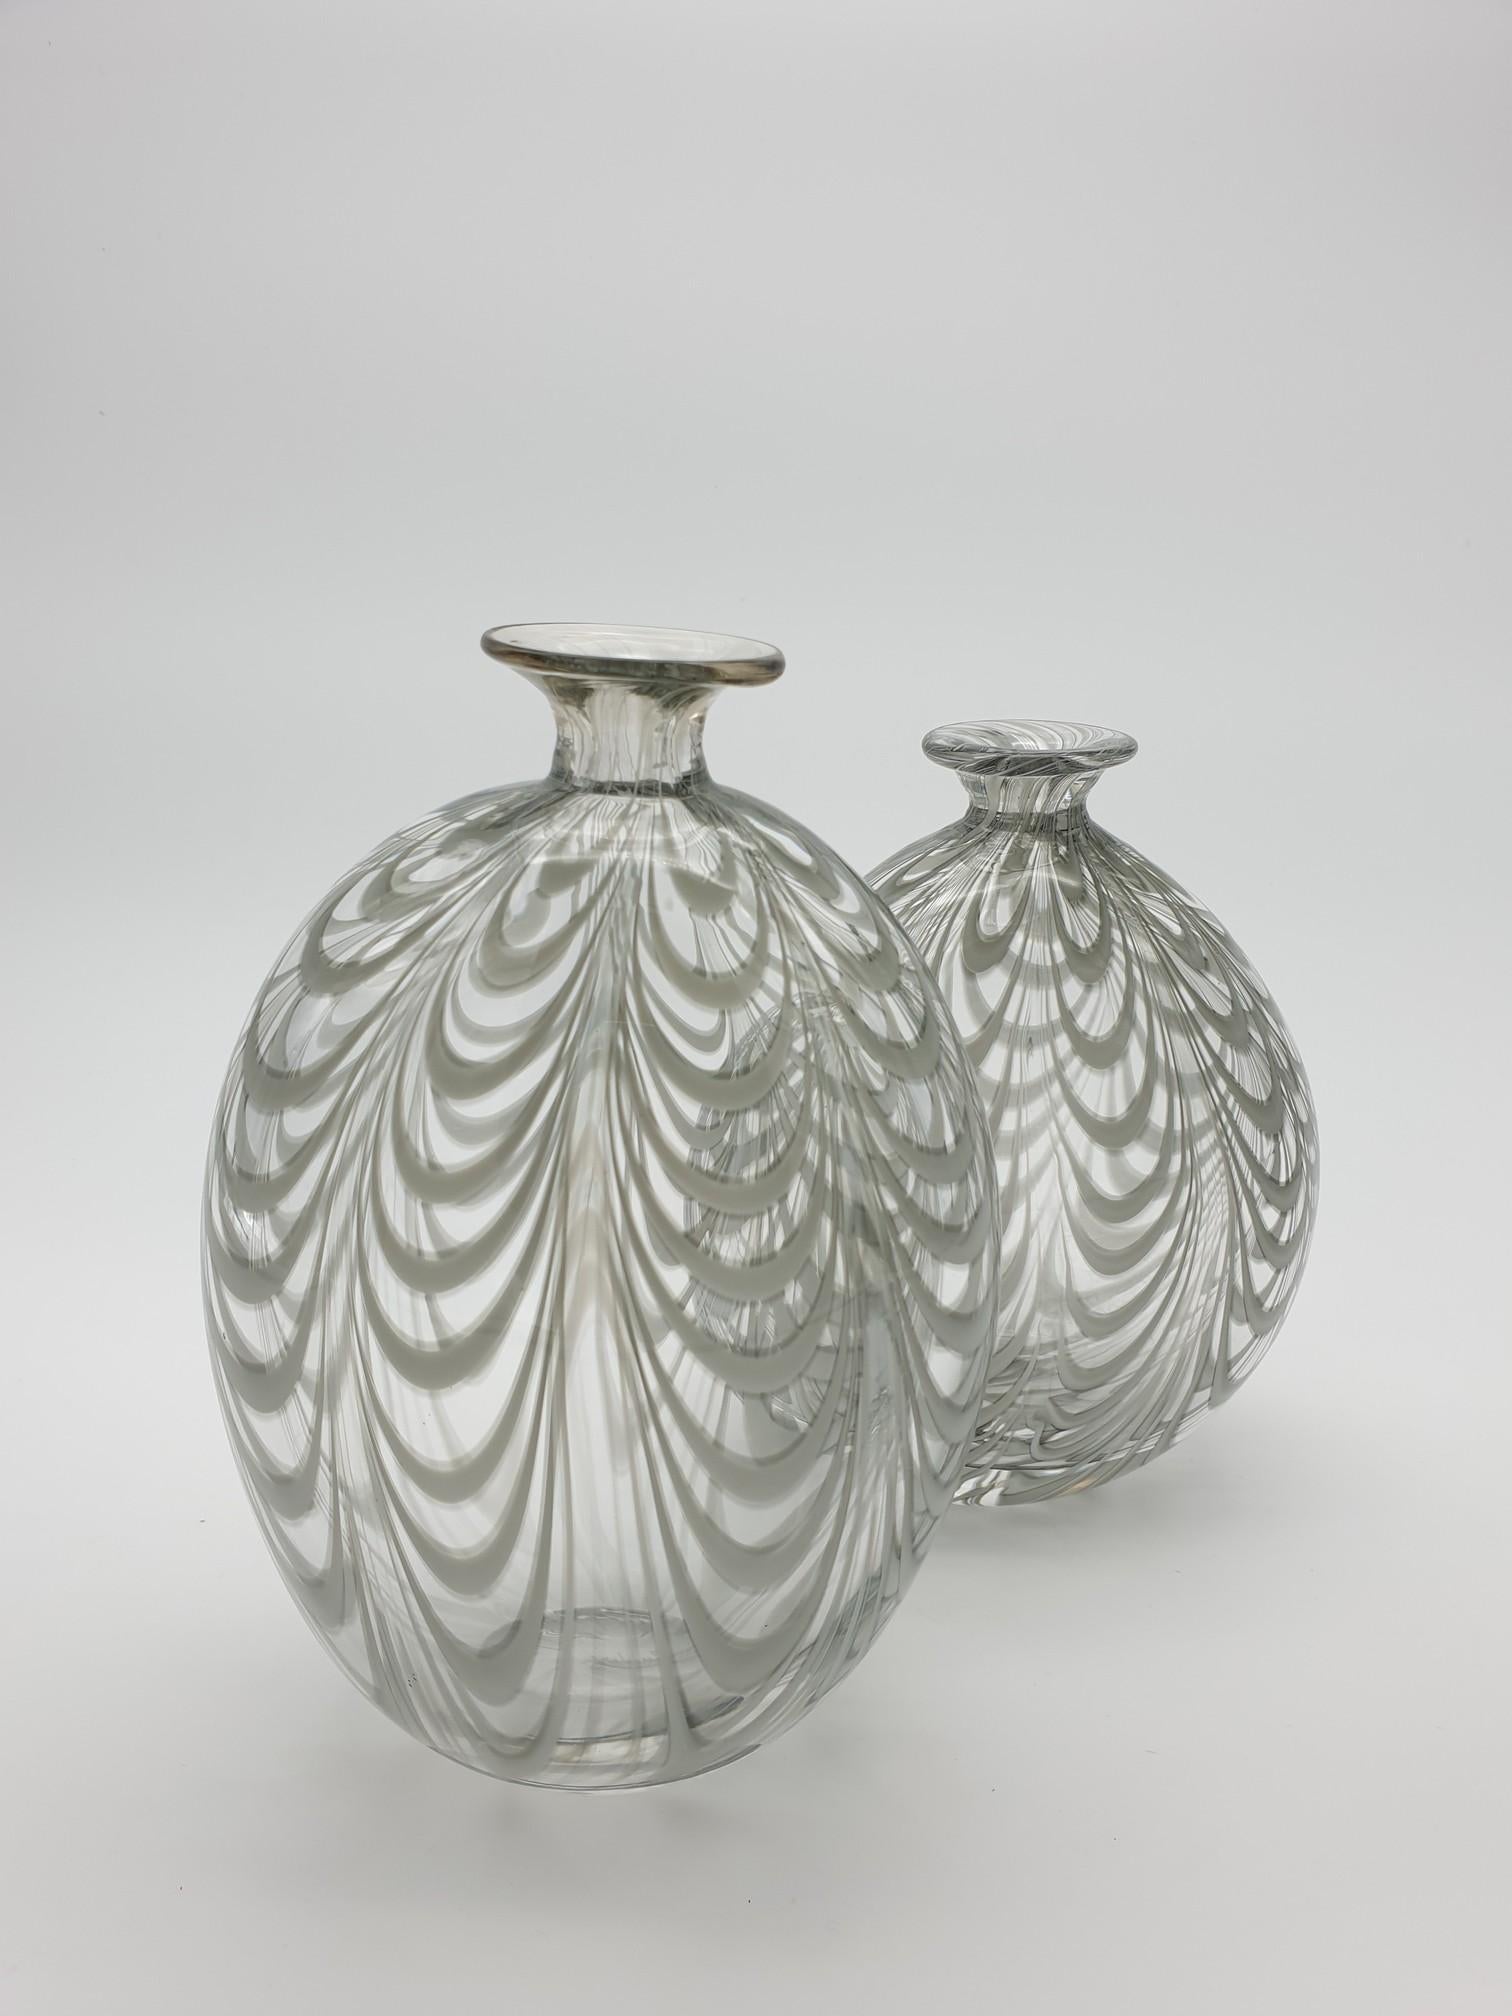 Pair of glass vases in clear color with gray 